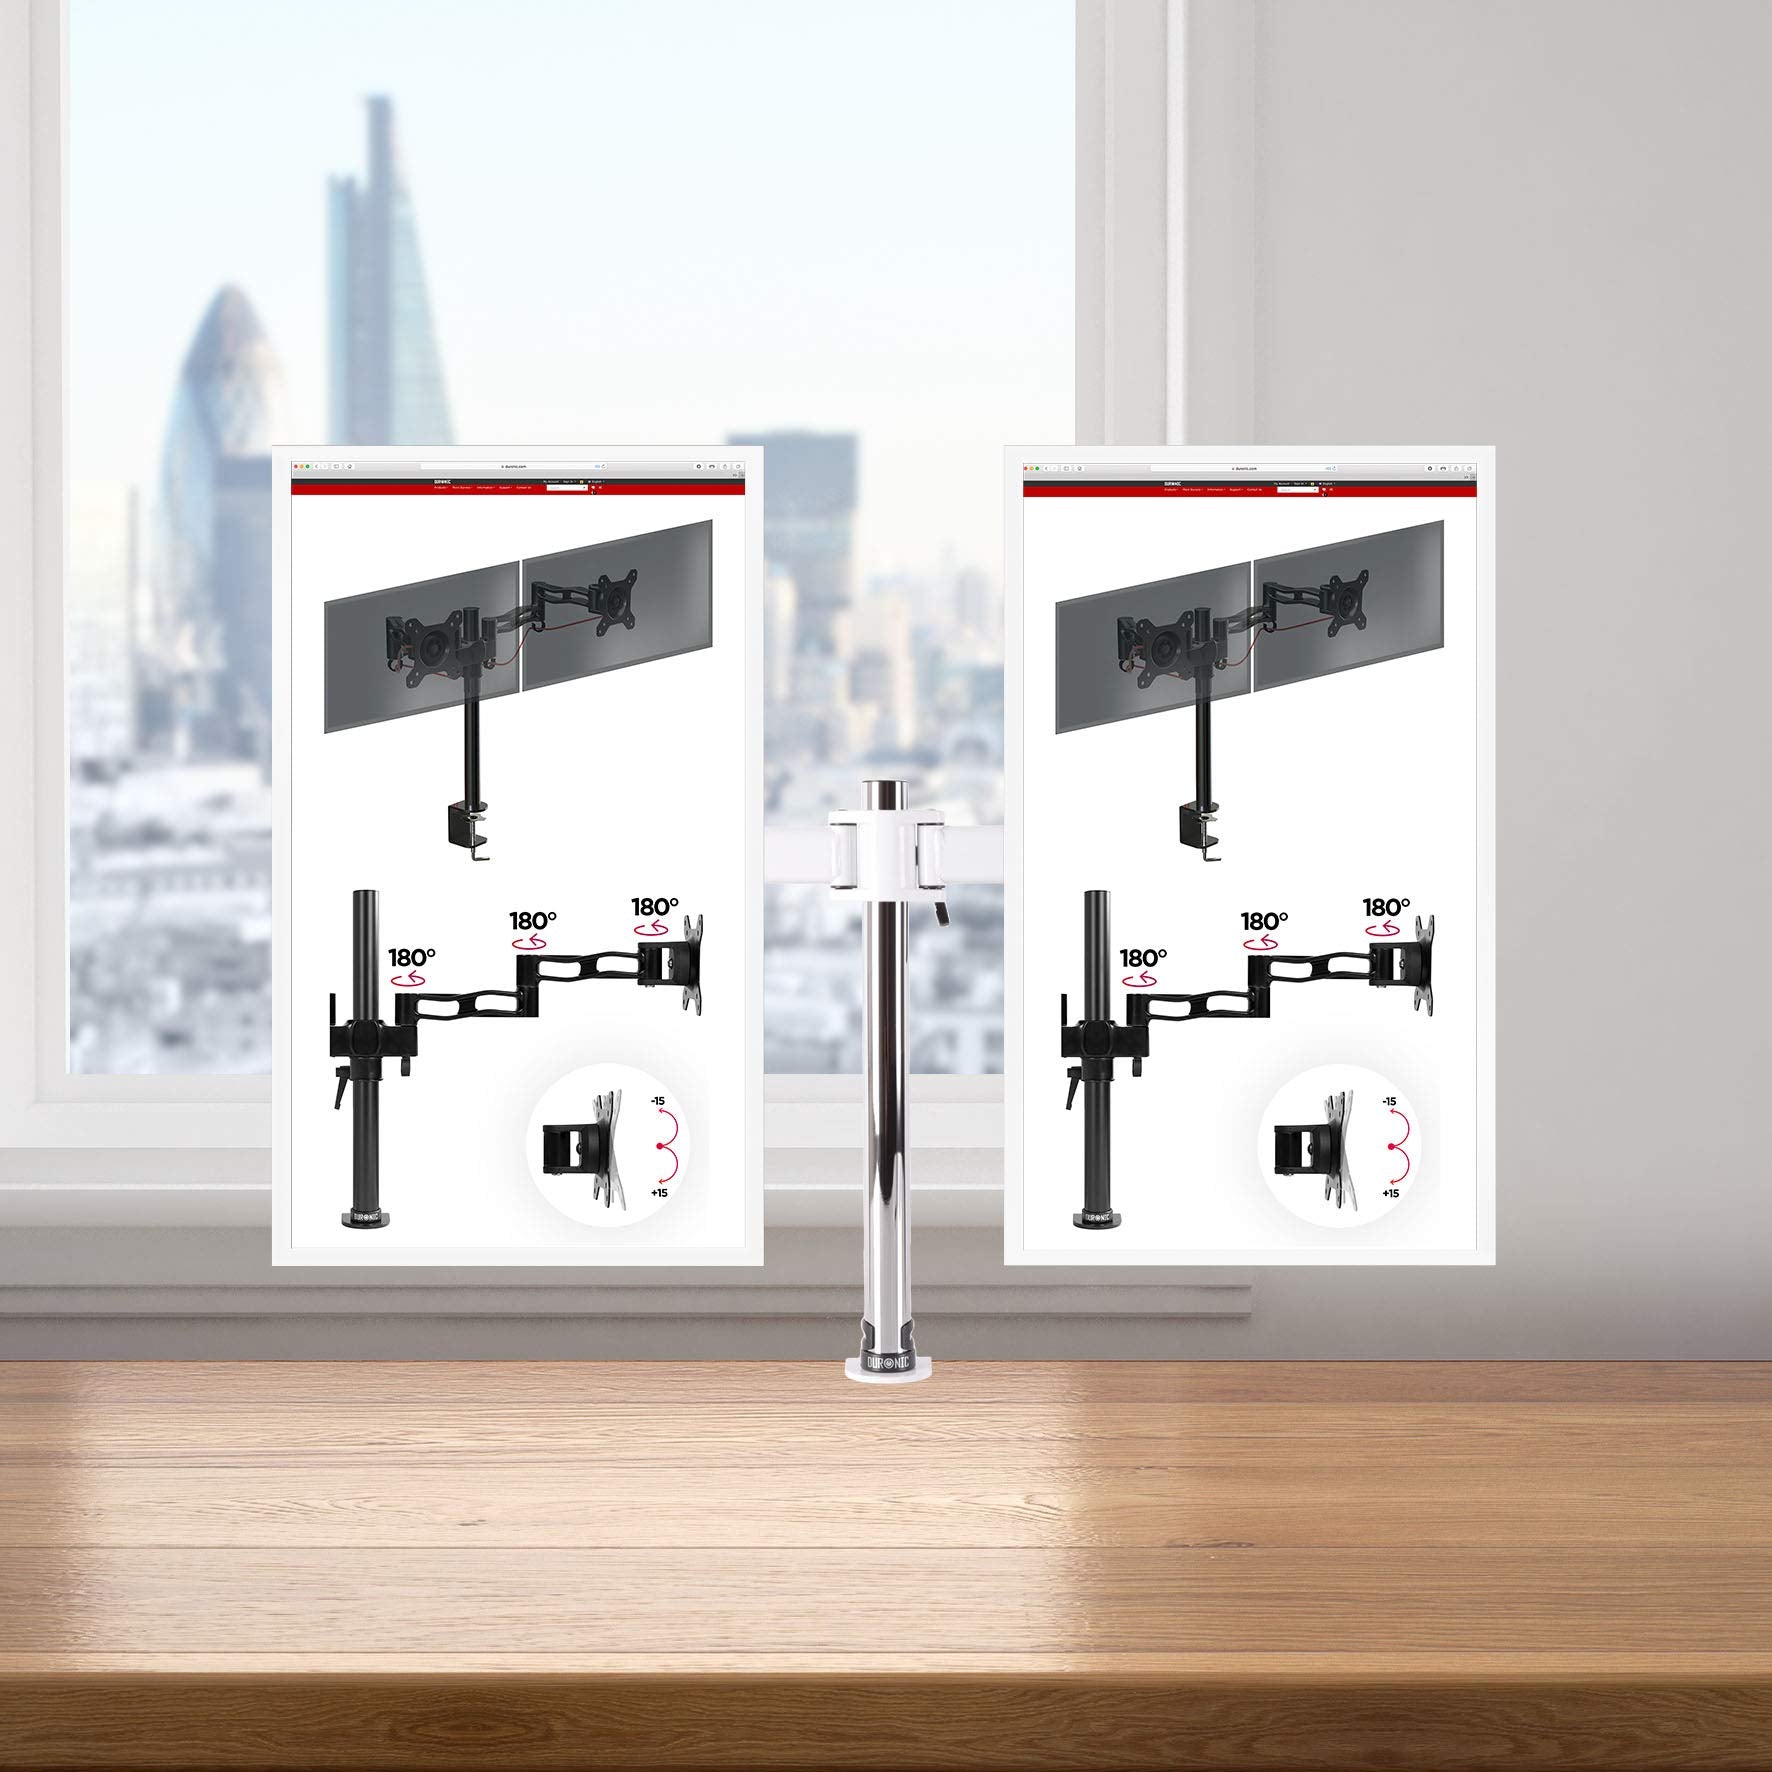 Duronic Dual Monitor Arm Stand DM252 WE, Double PC Desk Mount, Adjustable, For Two 13-27 Inch LED LCD Screens, 8kg Per Screen, Tilt -90°/+35°, Swivel 180°, Rotate 360° - White